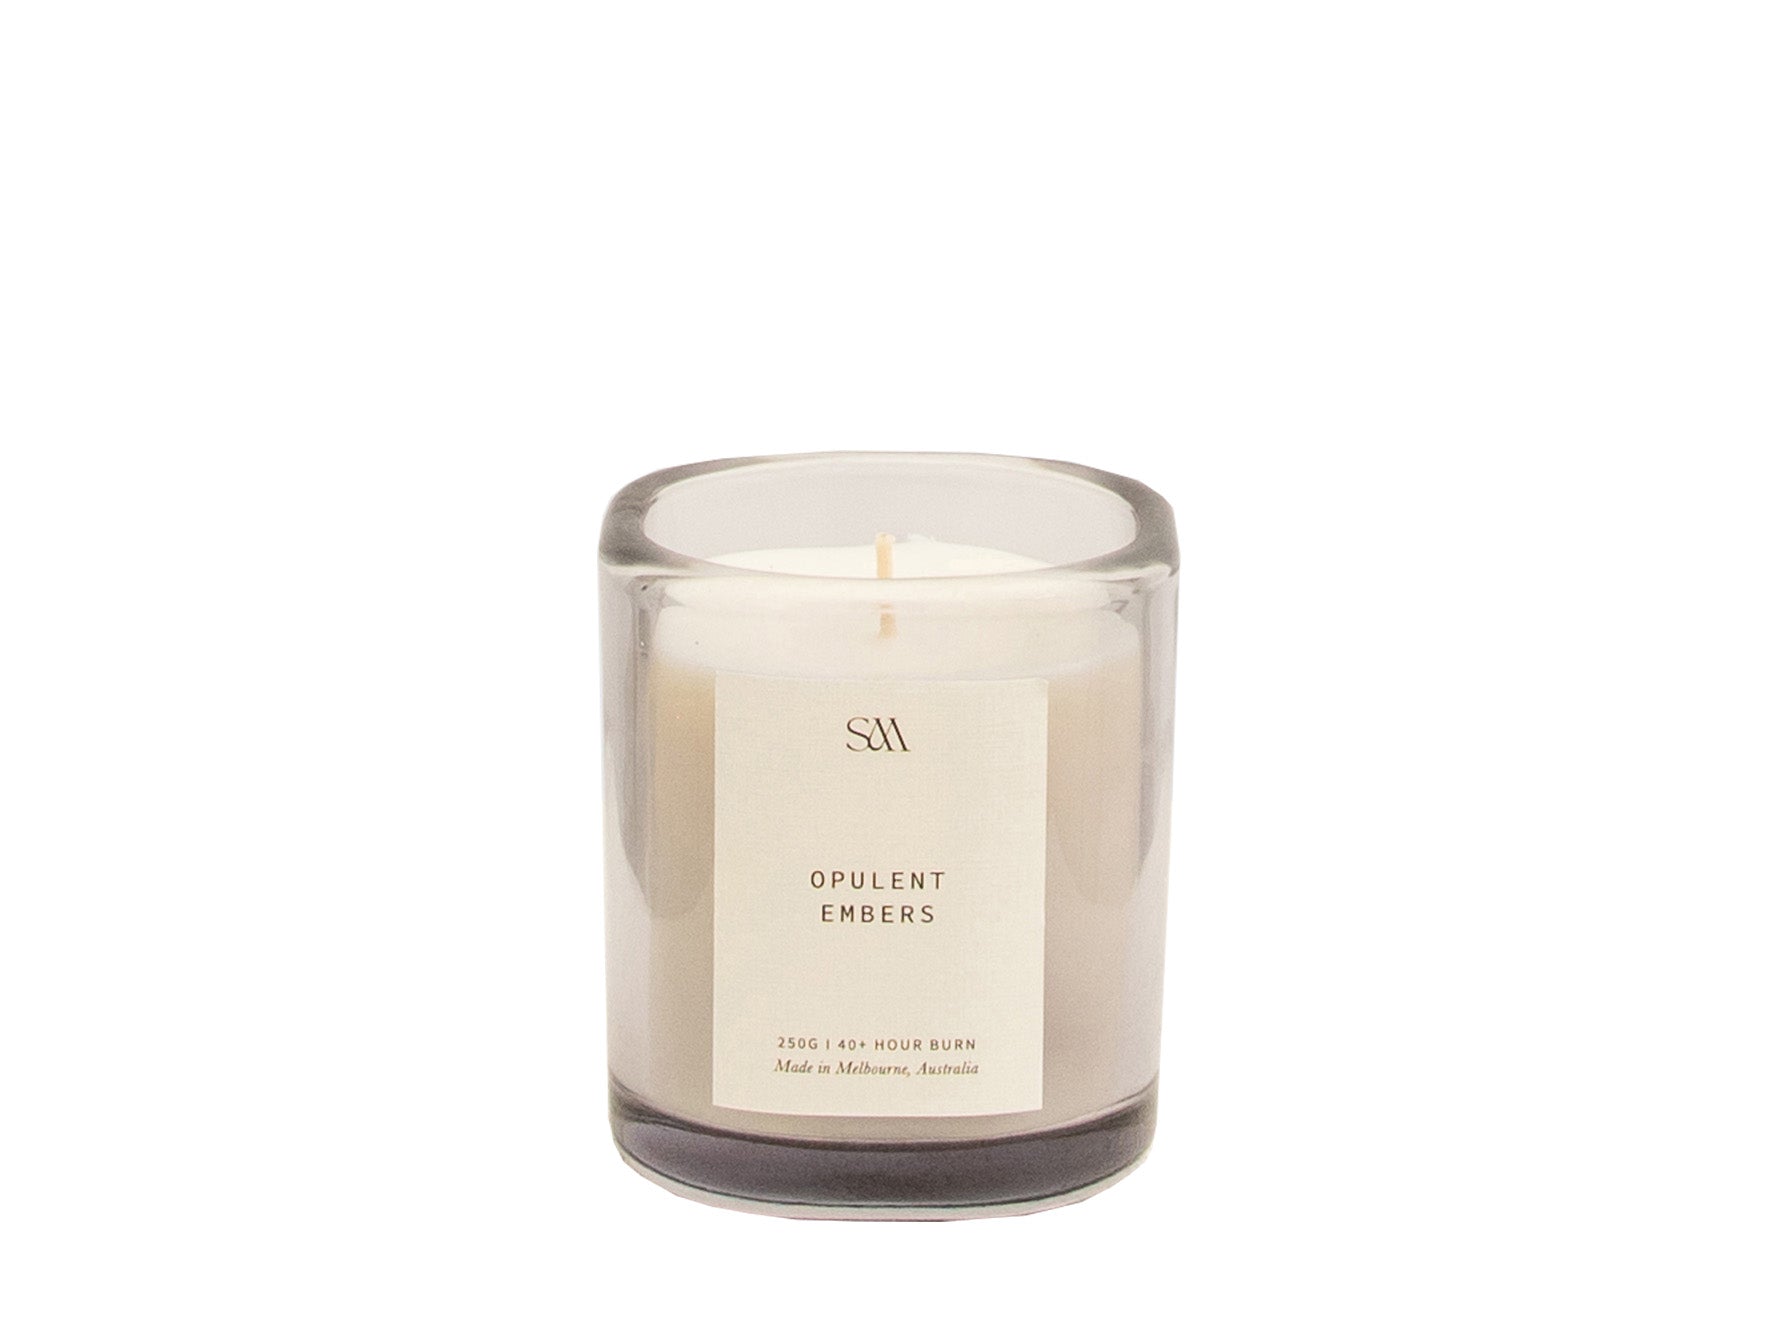 Opulent Embers 250g Signature Scented Candle